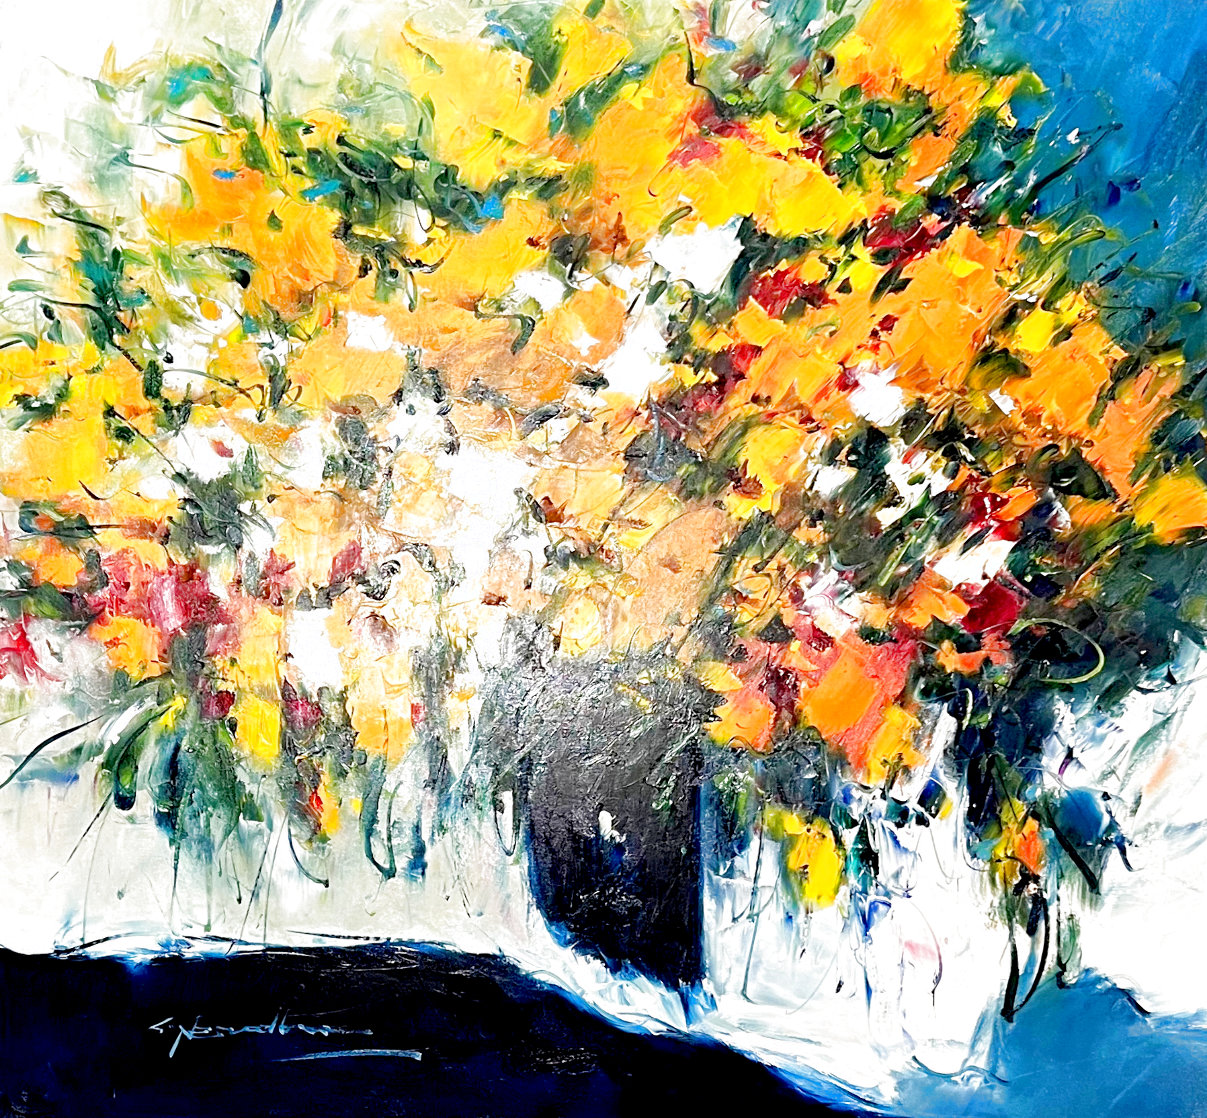 Untitled Floral 2006 40x40 - Huge Original Painting by Christian Nesvadba